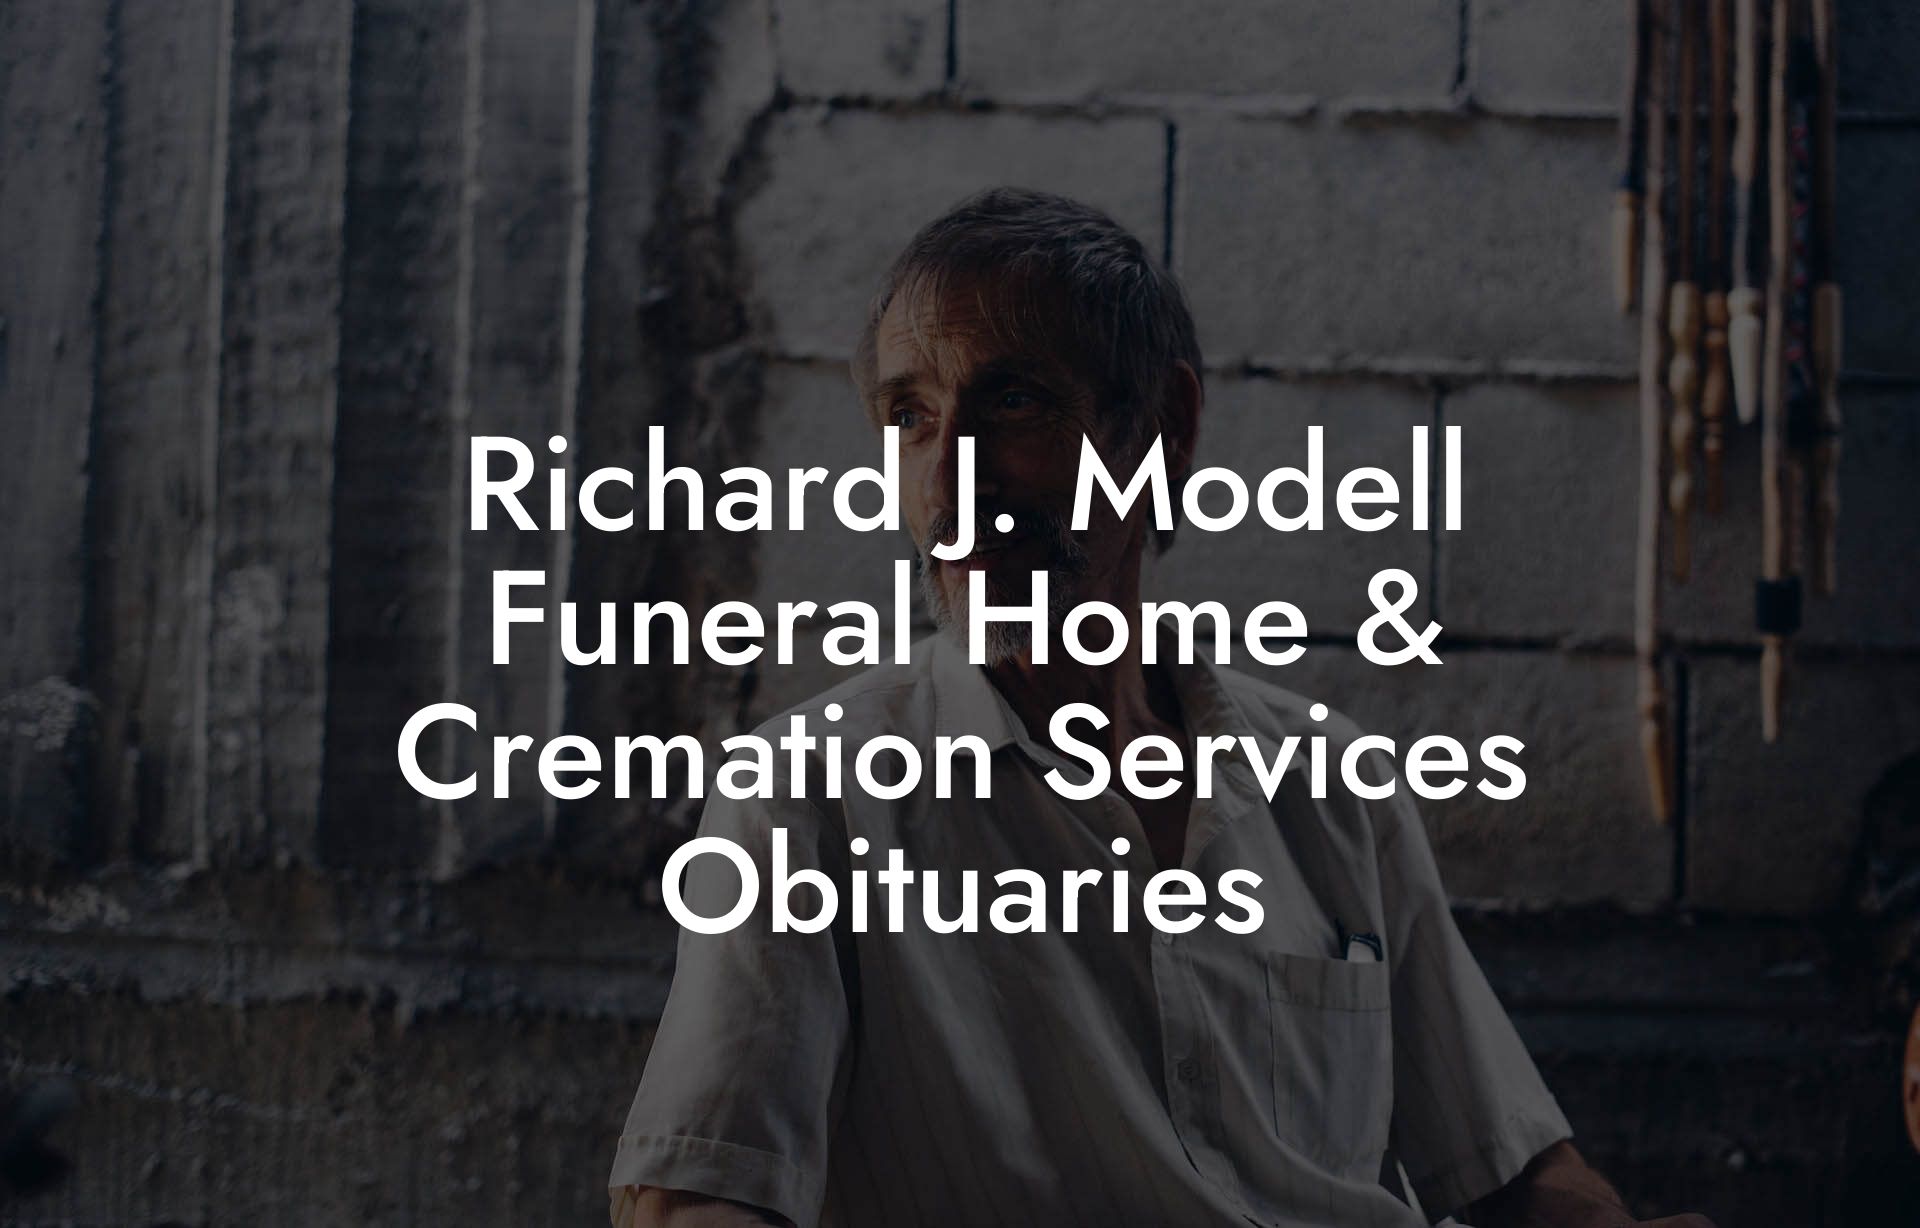 Richard J. Modell Funeral Home & Cremation Services Obituaries